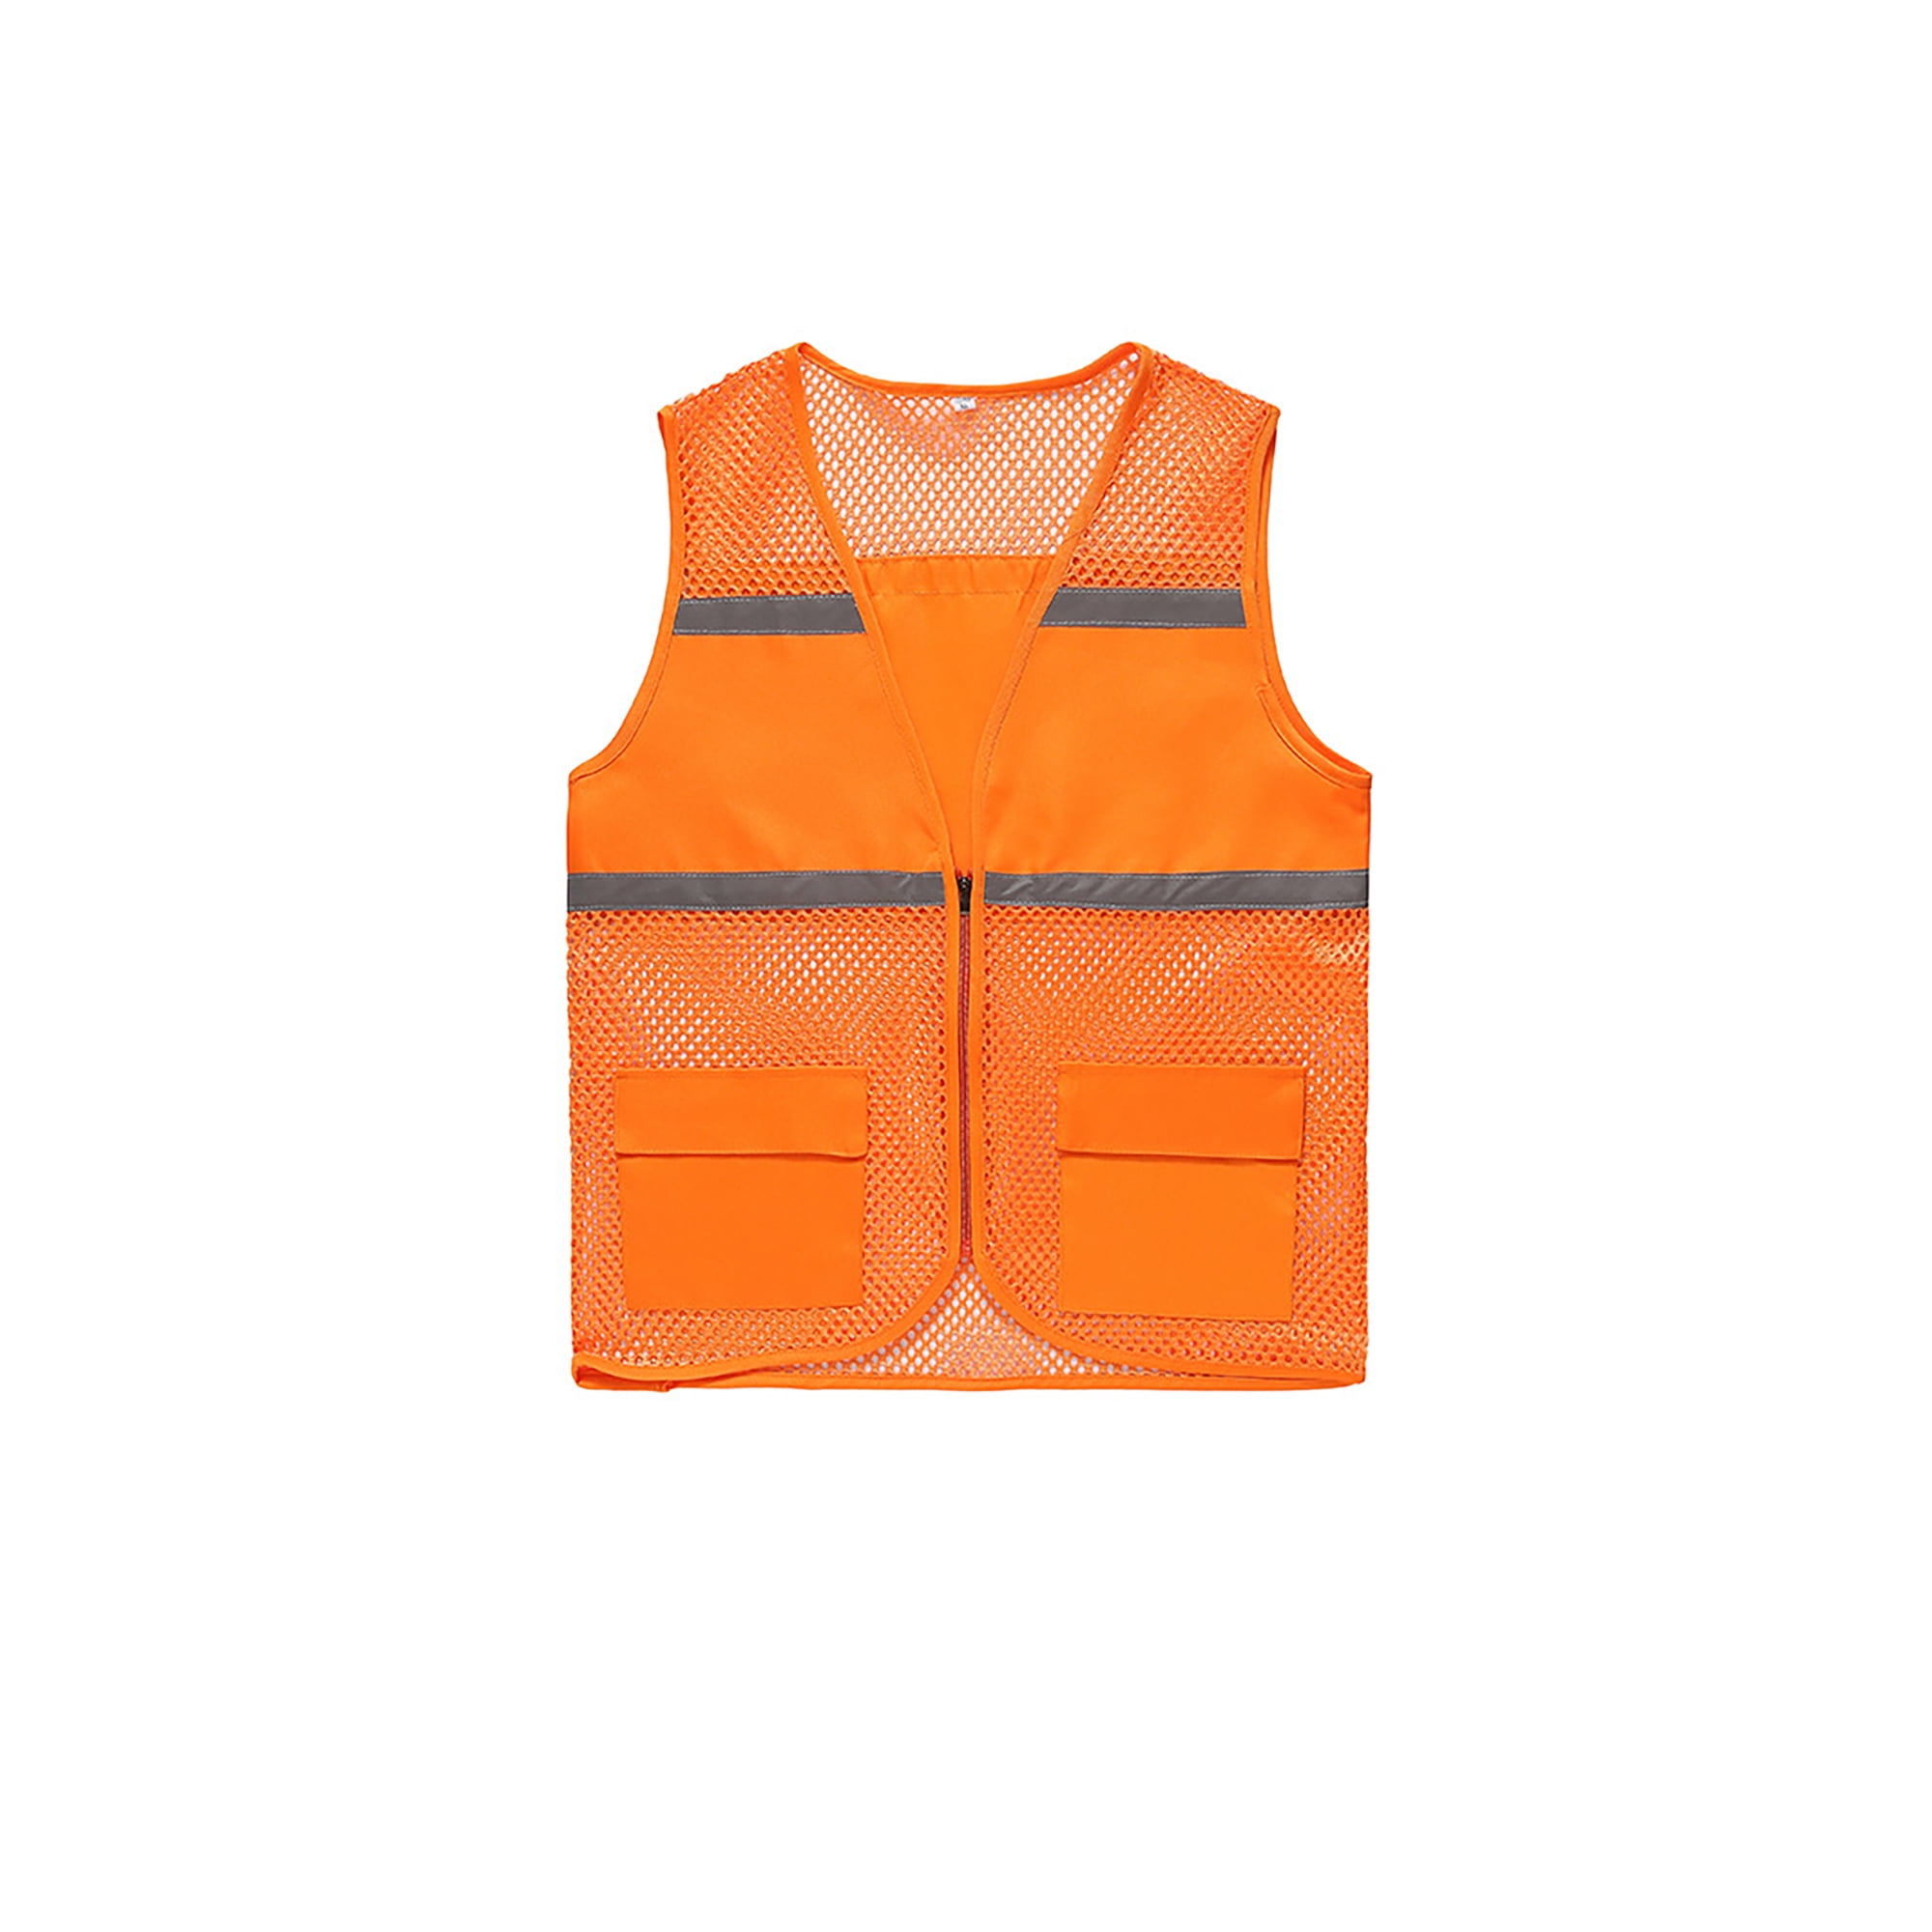 AWLYLNLL High Visibility Safety Vest for Men Women, Construction Vest with  Reflective Strips and Zipper Front, Neon Blue, Medium